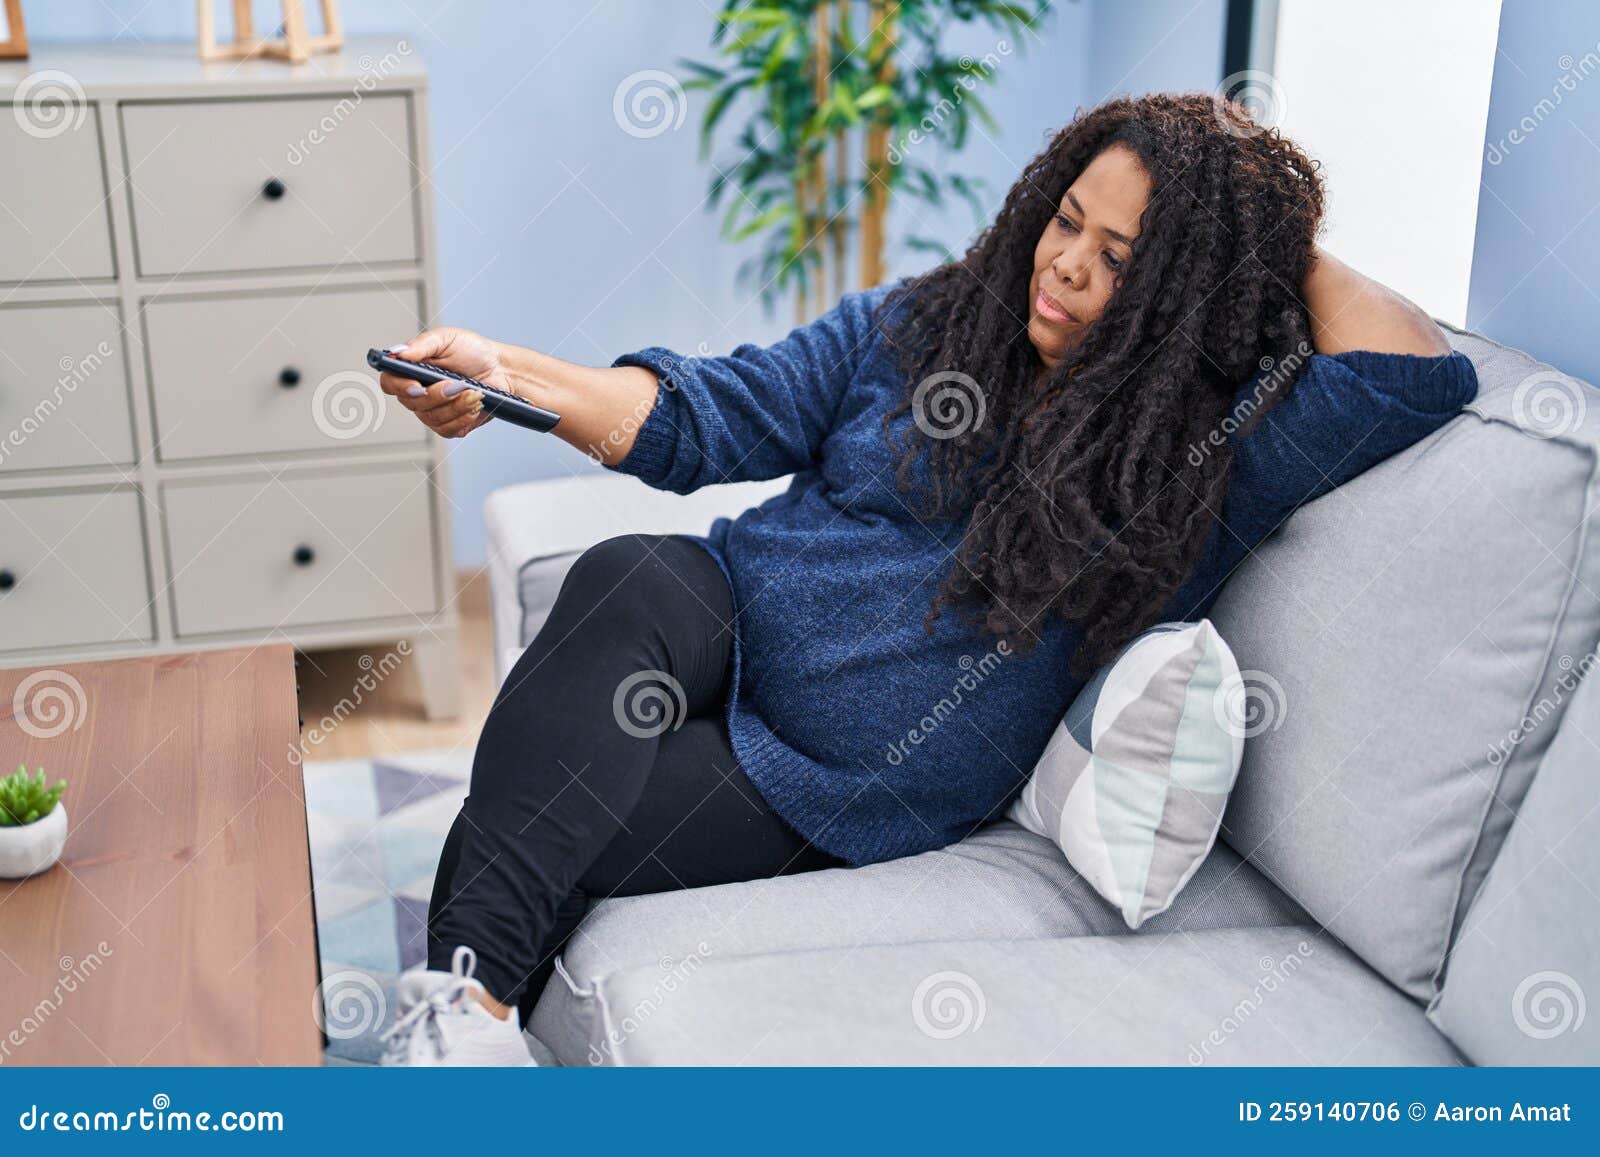 African American Woman Watching Tv Lying on Sofa with Boring Expression ...